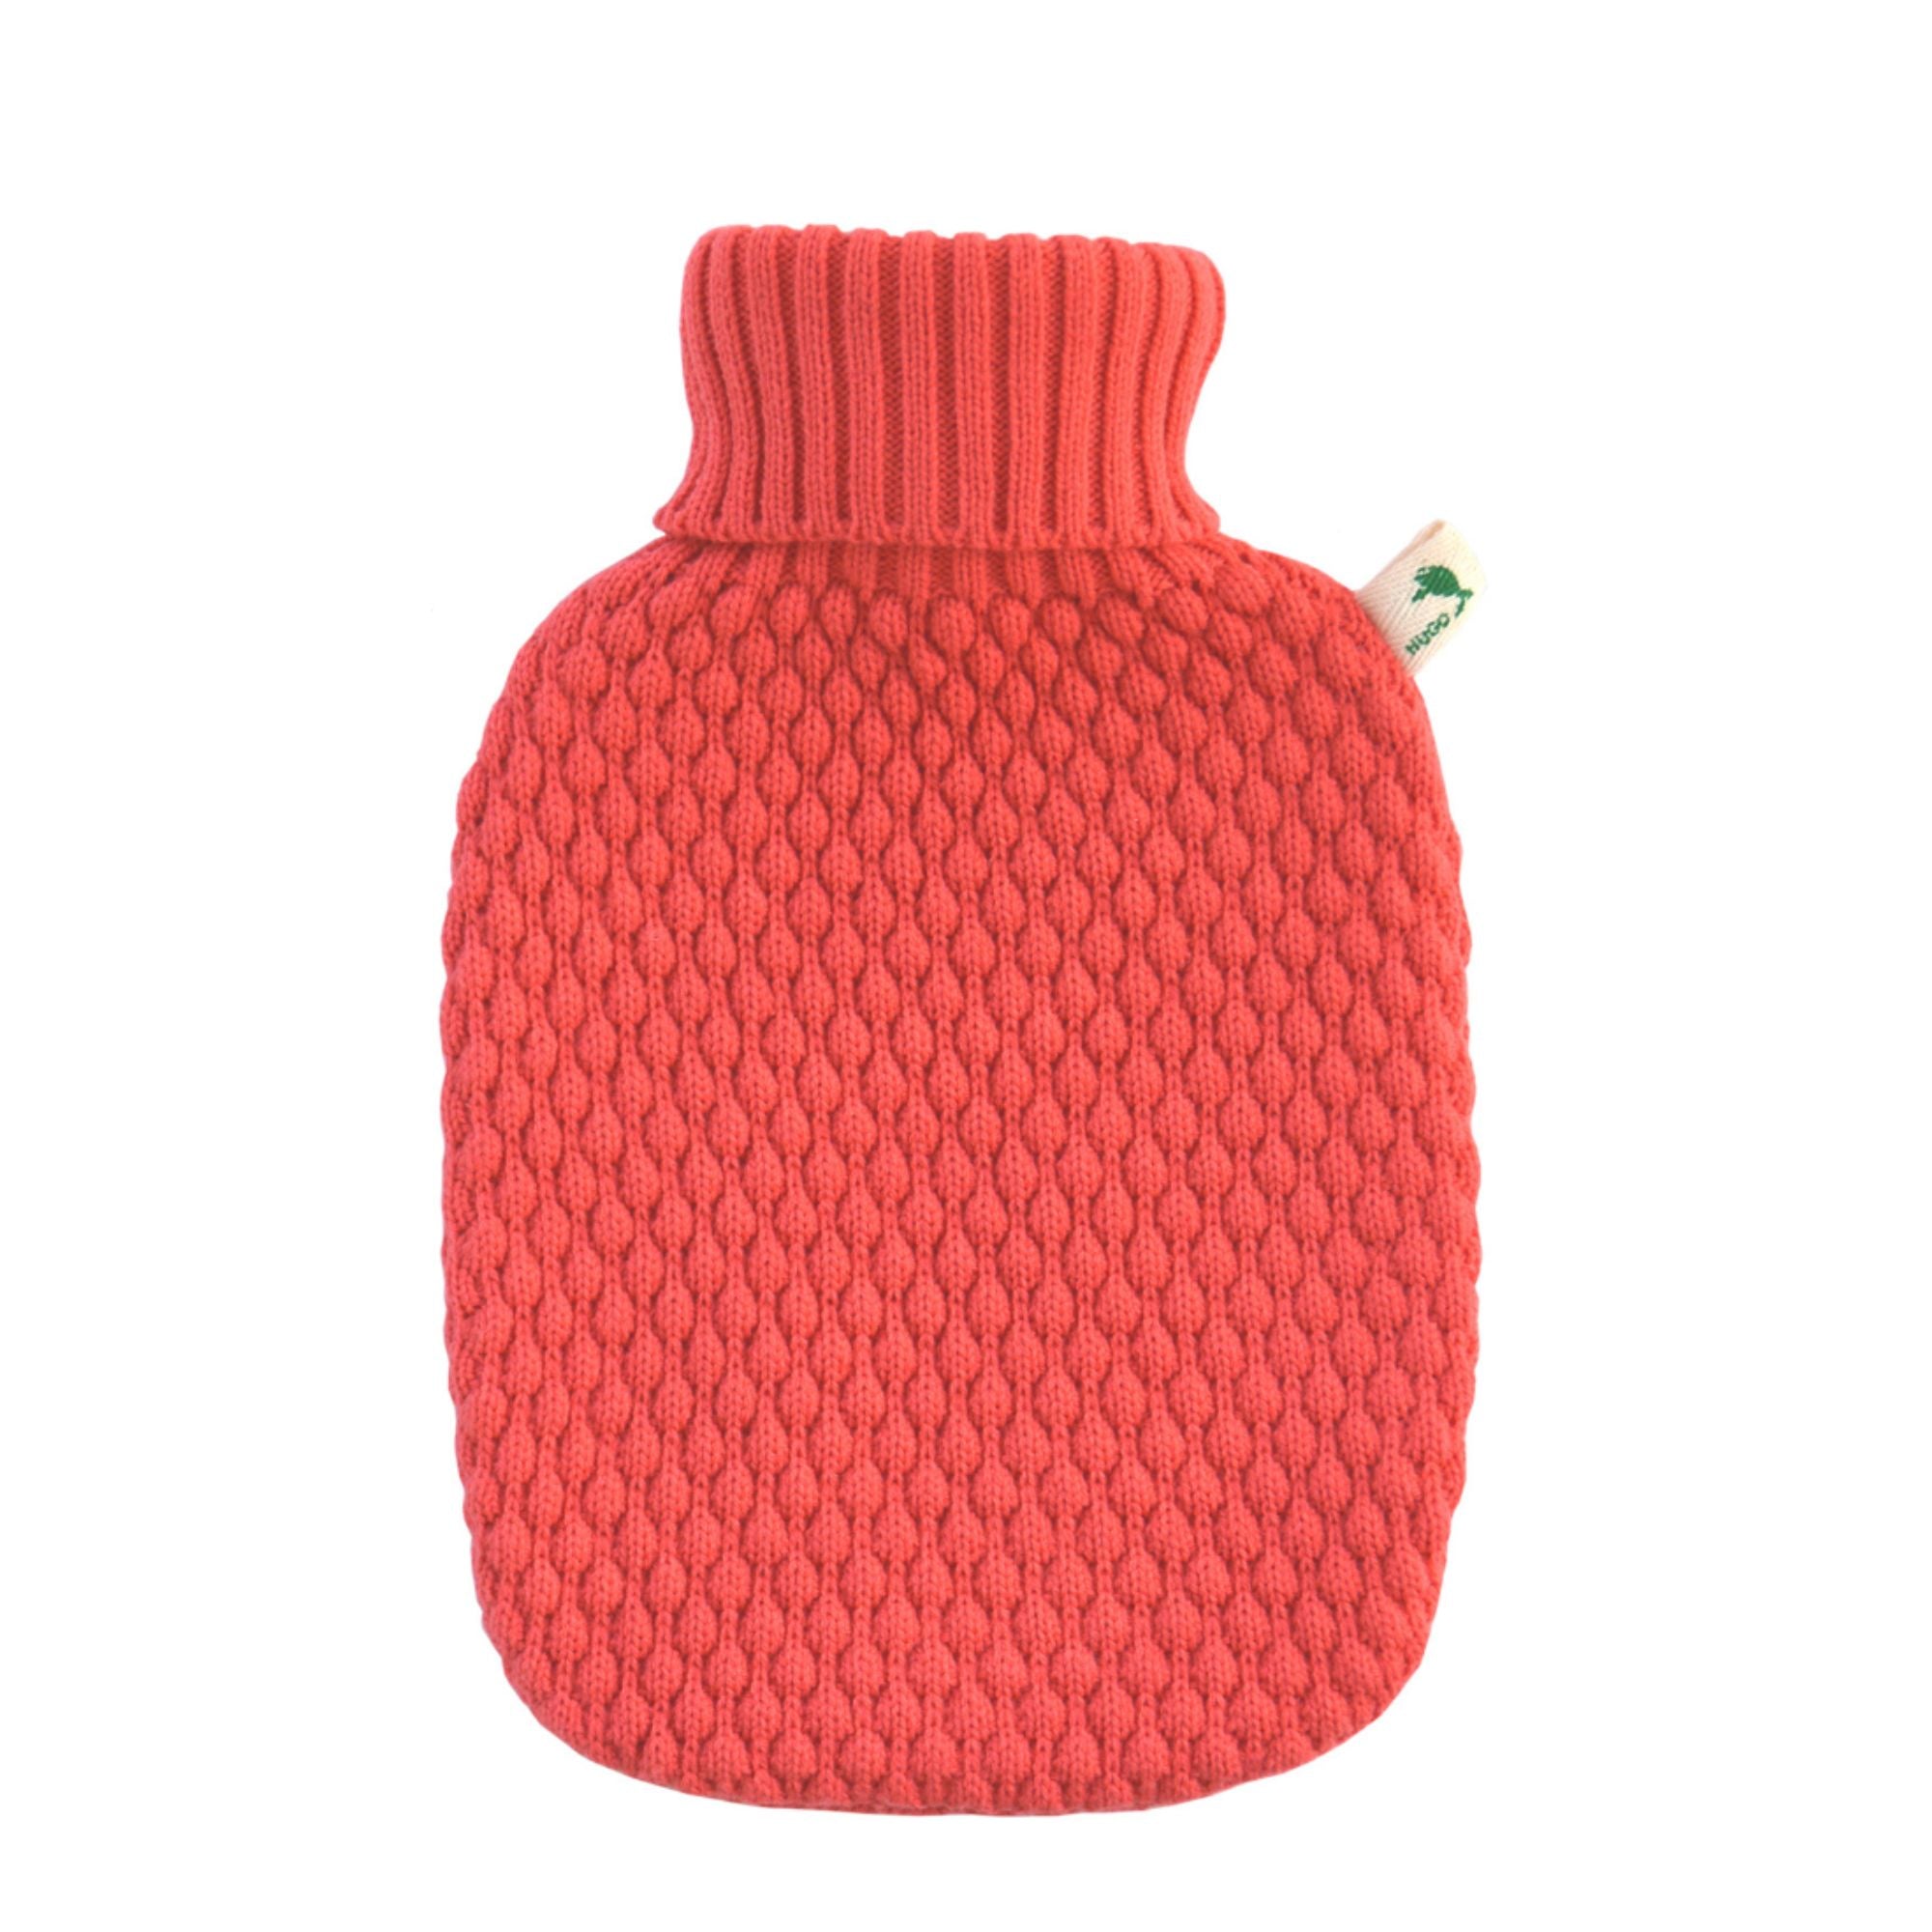 Dottie - Grey & Natural Knitted Hot Water Bottle Cover – Mason